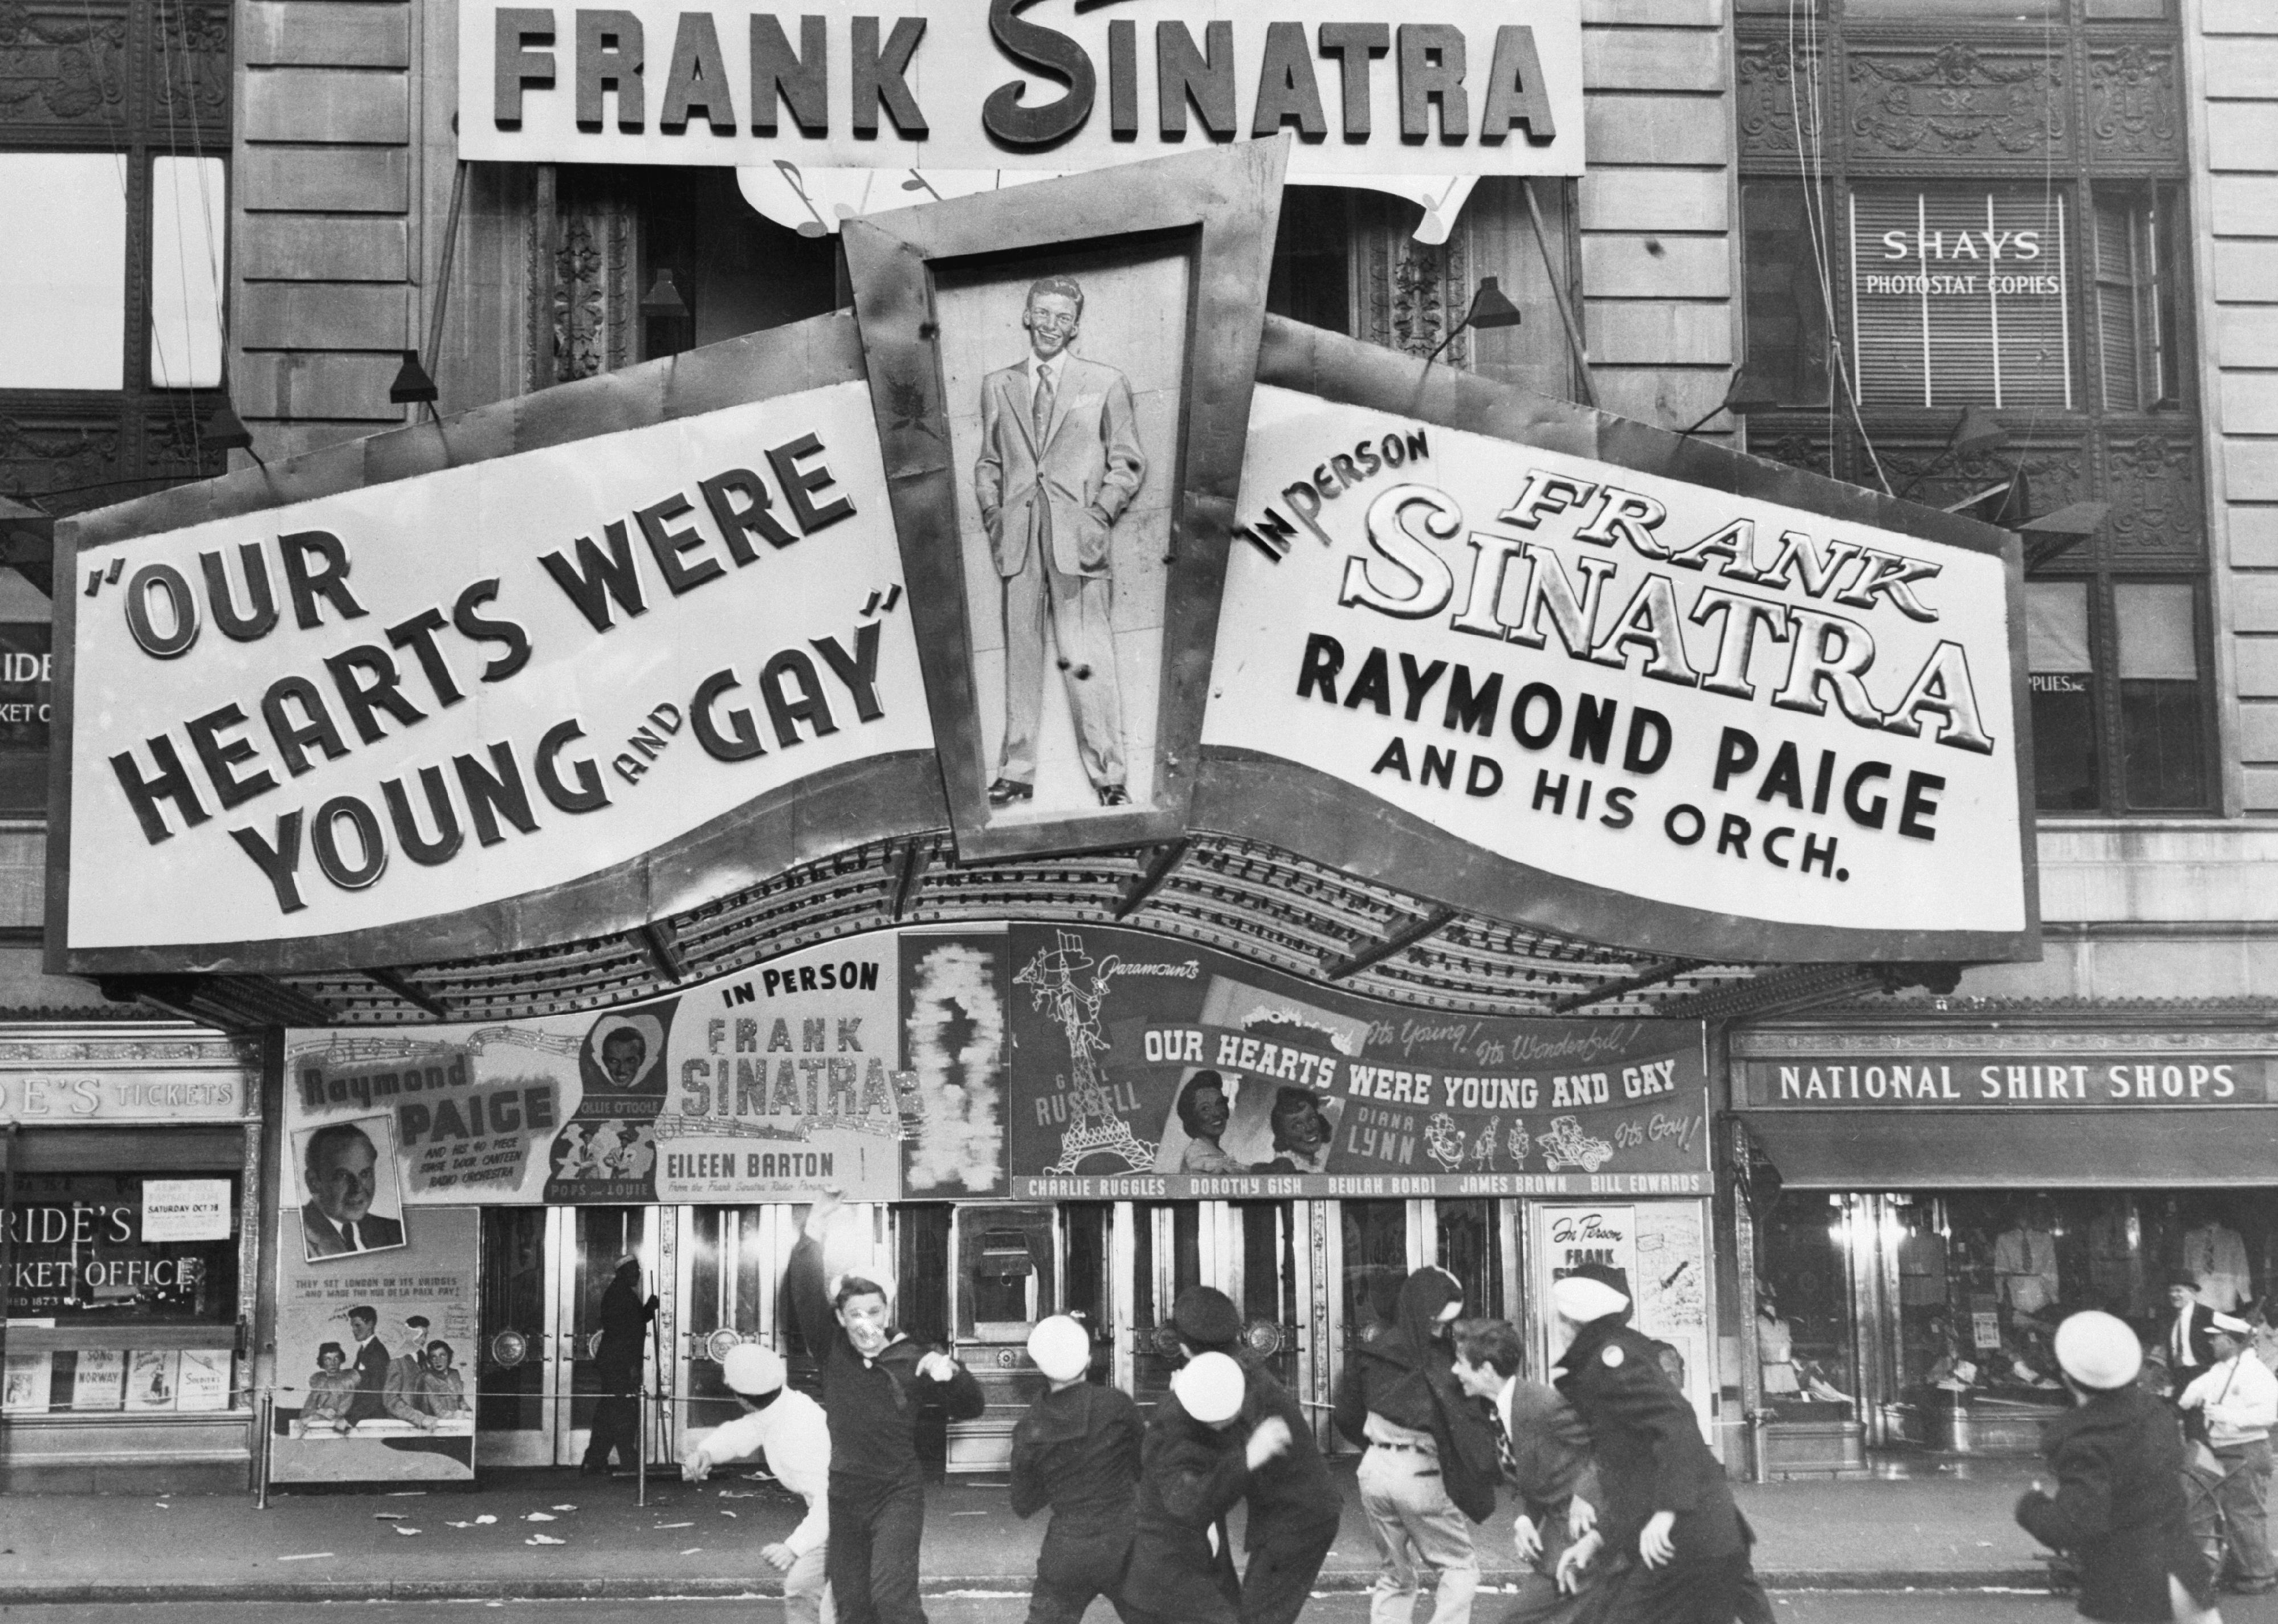 People Throwing Tomatoes at a Theater with Frank Sinatra sign.